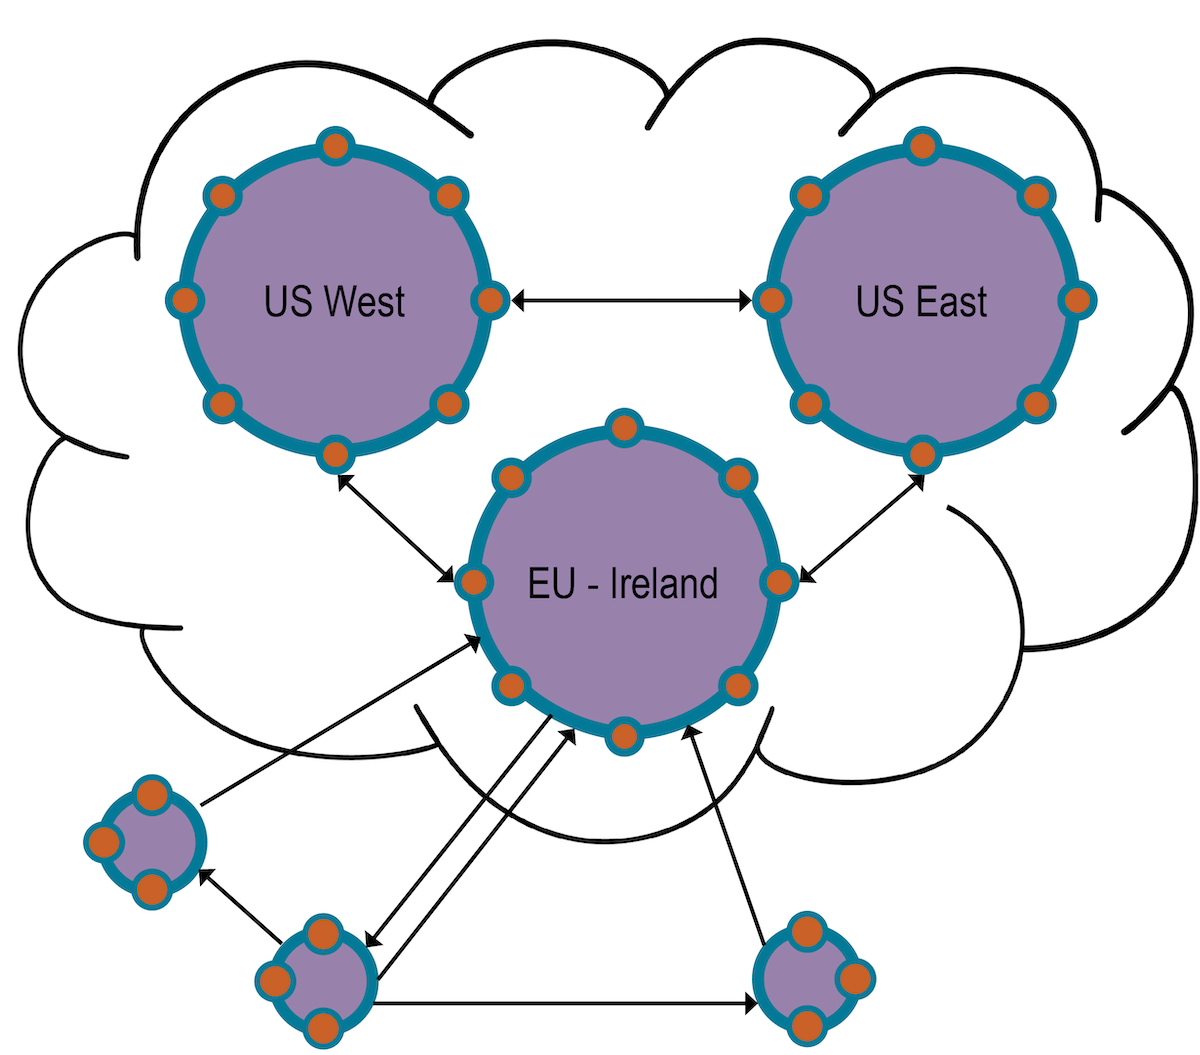 Image showing remote sensors transmitting to a centralized hub cluster, while one remote sensor also transmits to other remote sensors.